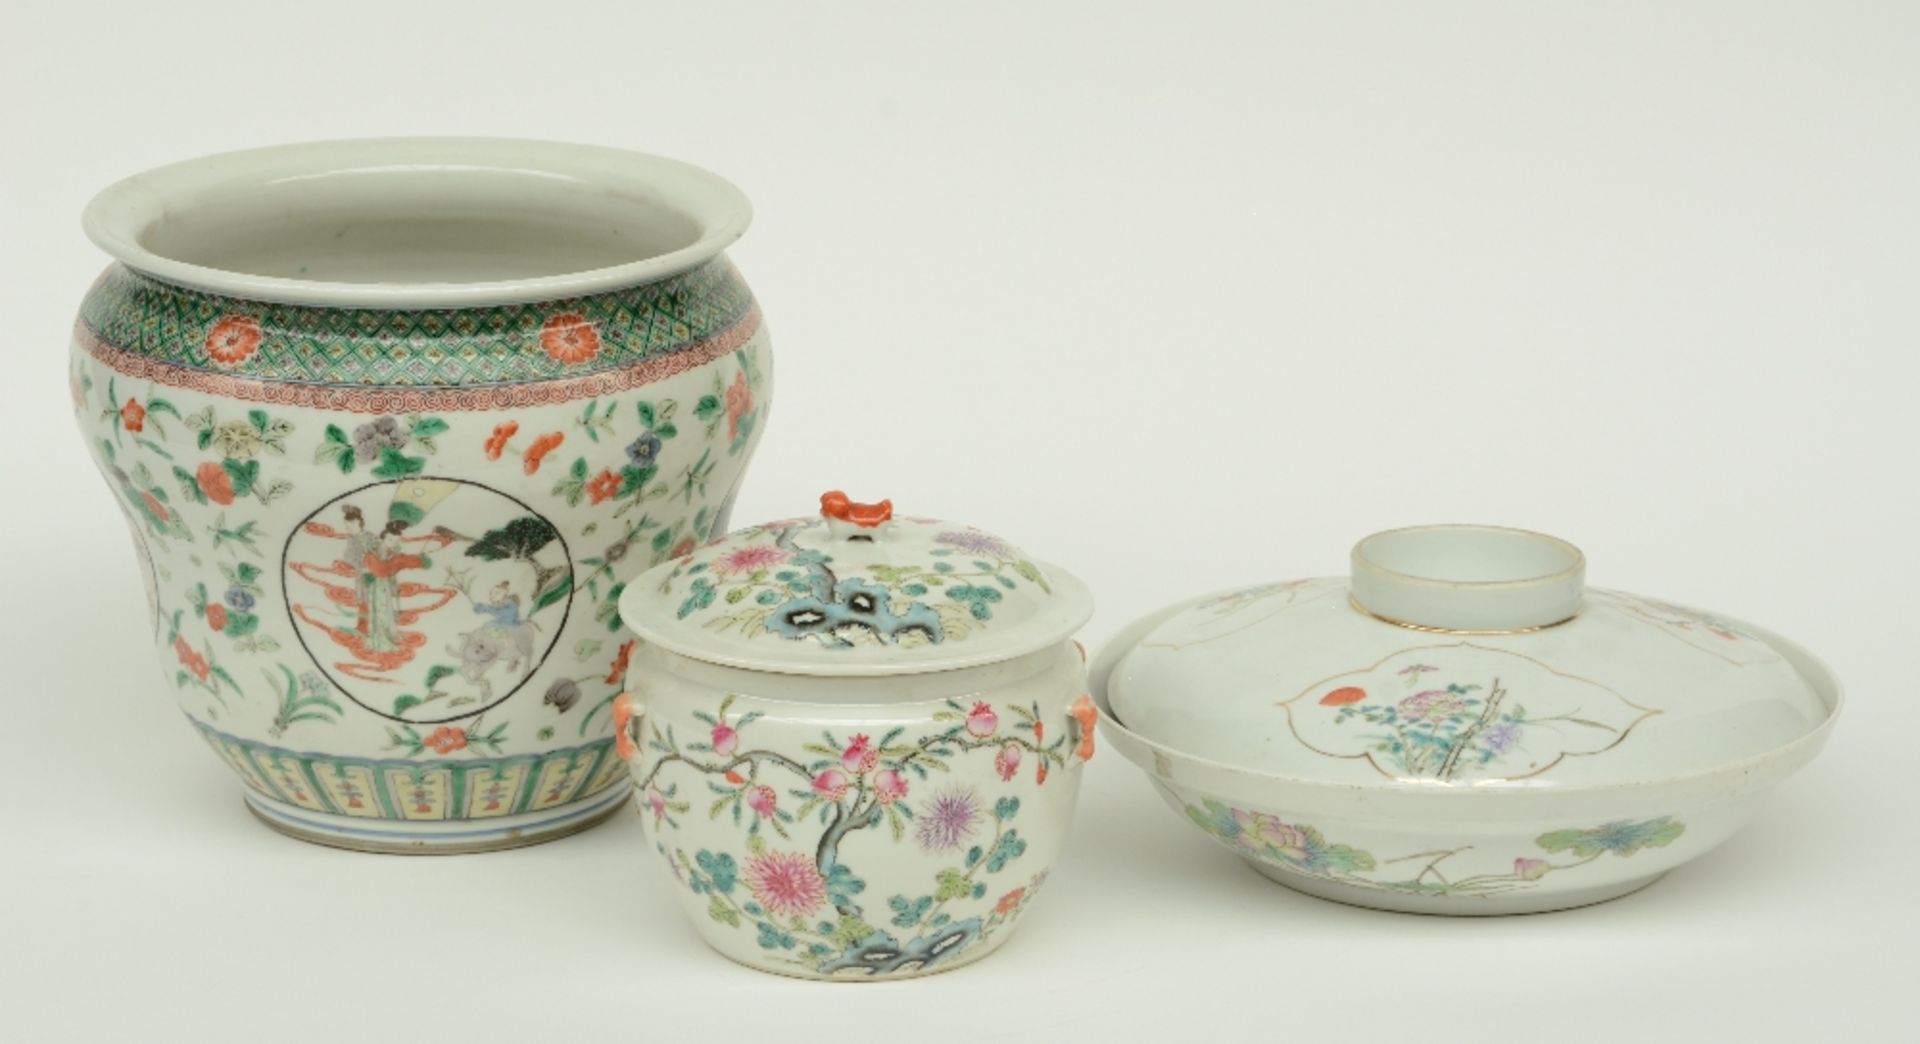 A Chinese famille verte jardinière decorated with landscapes, figures and floral motifs, 19thC;